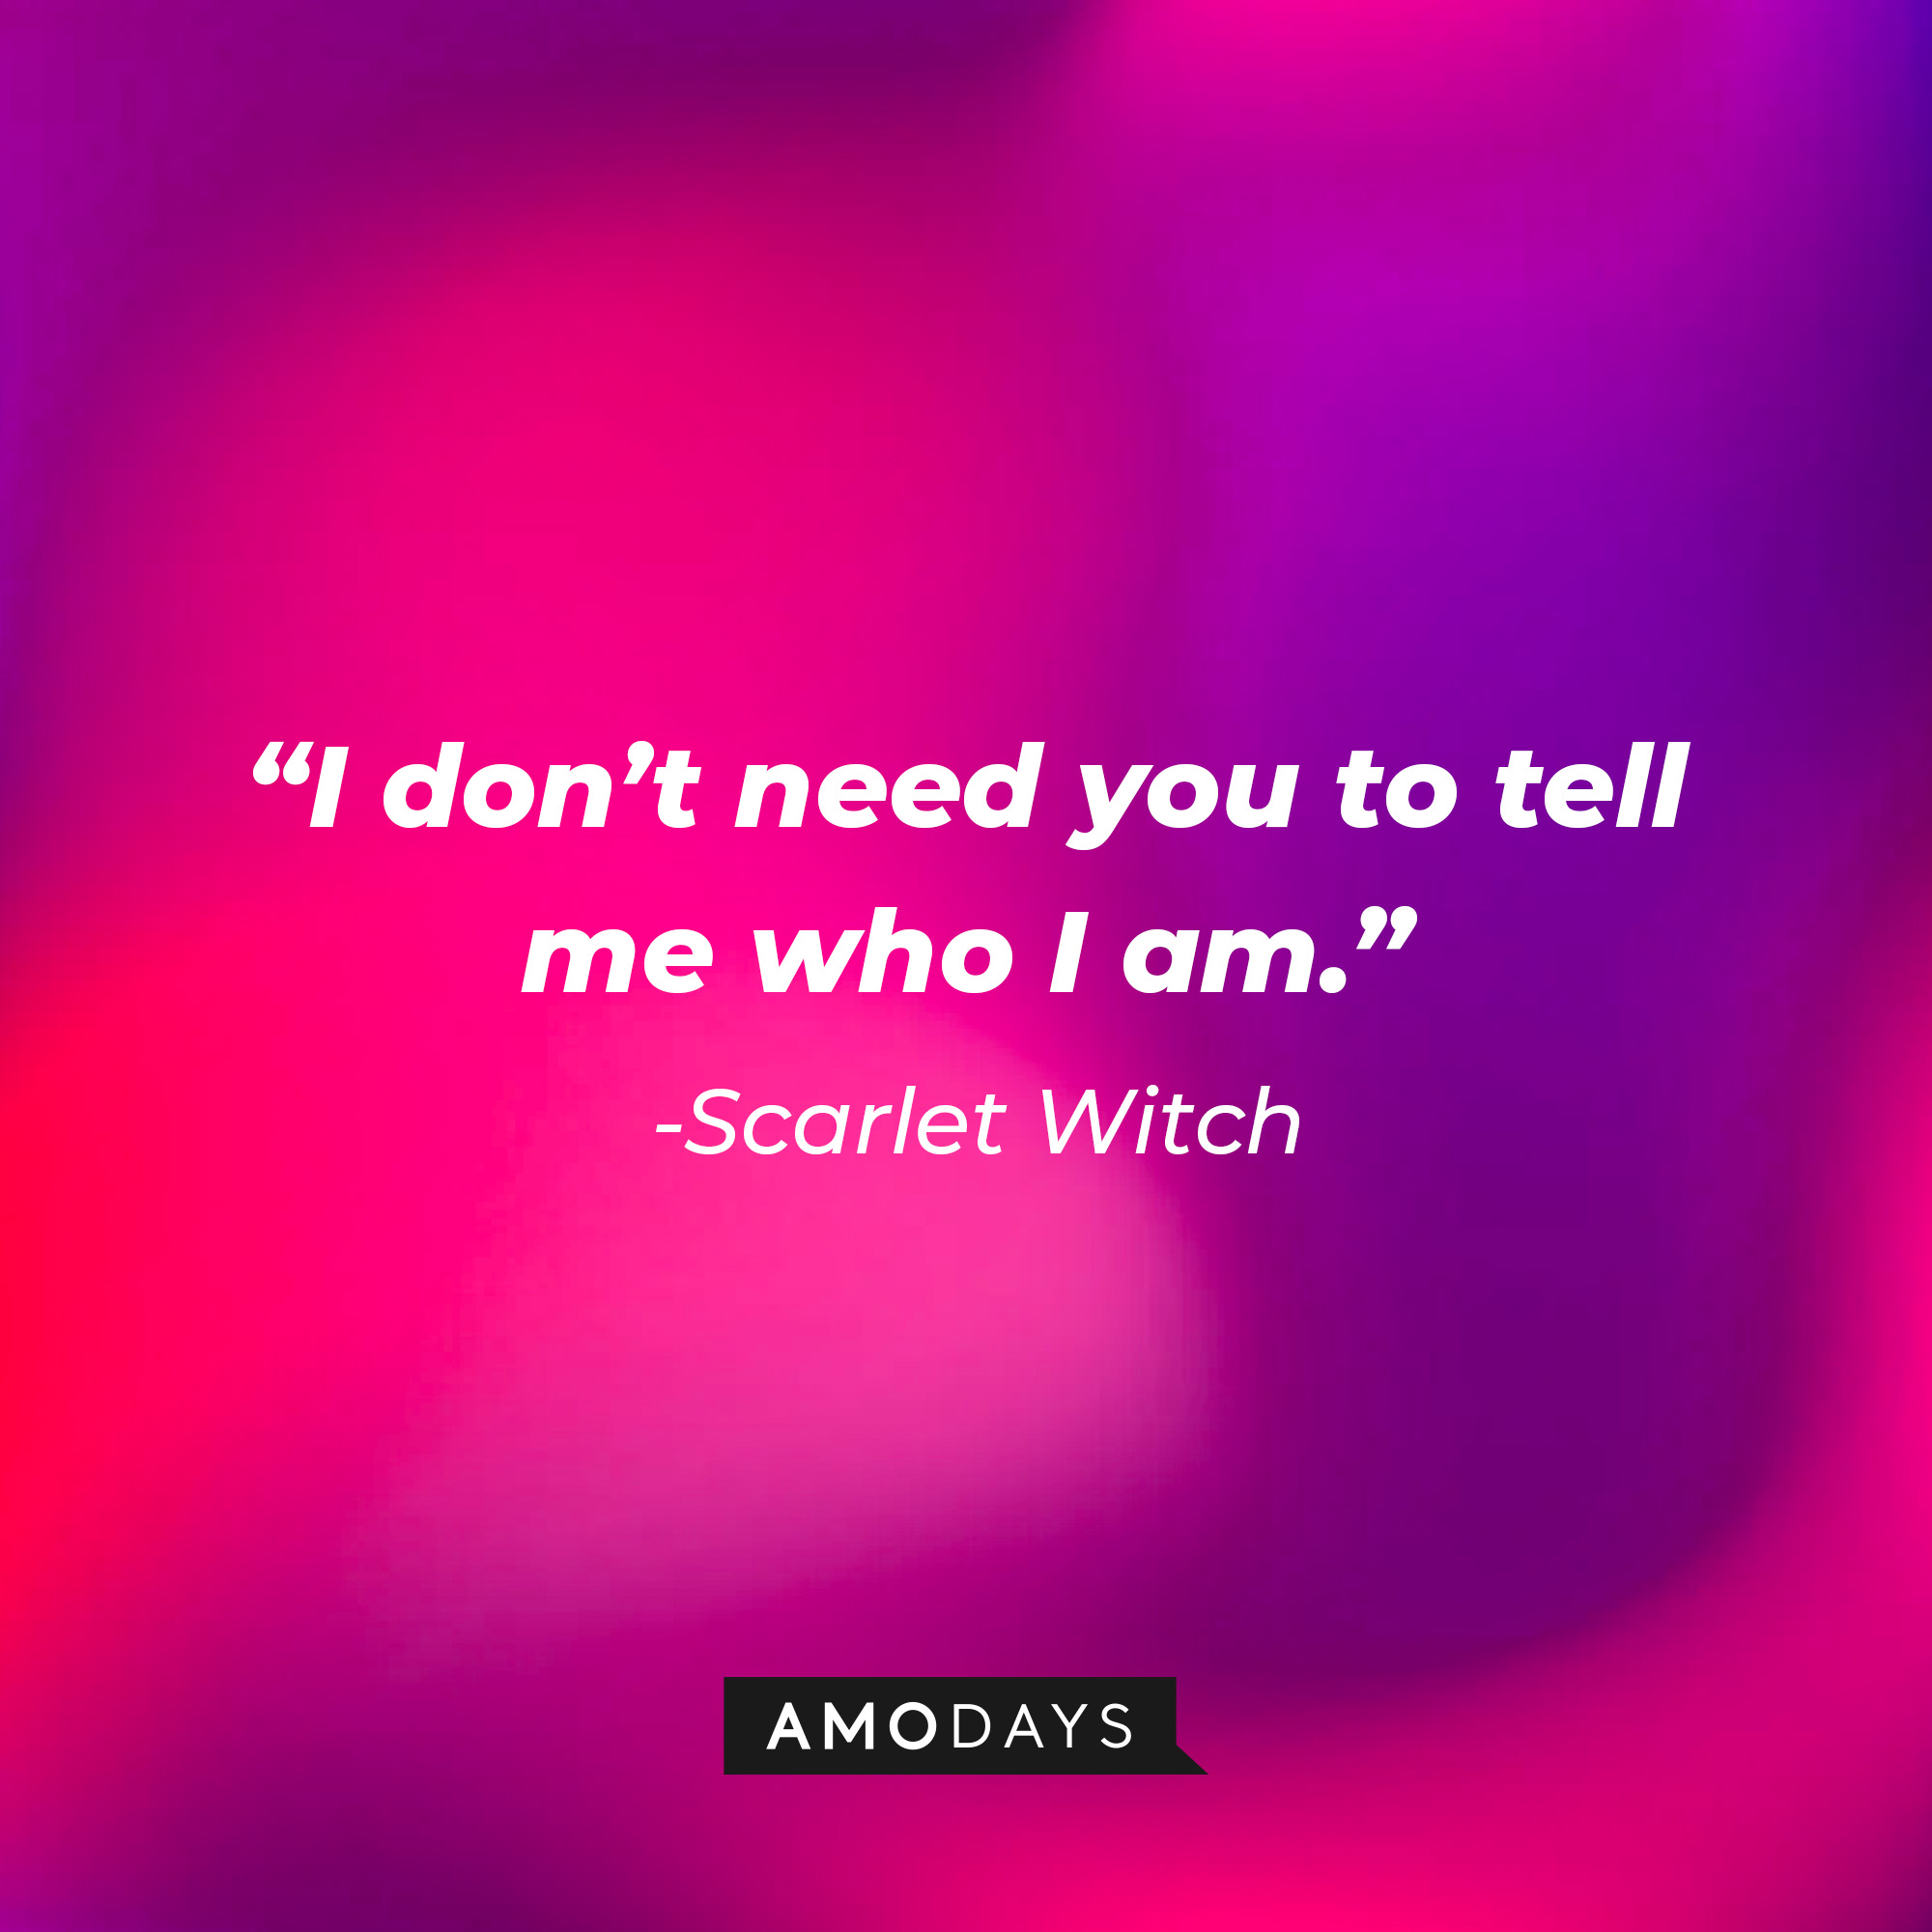 Scarlet Witch’s quote: "I don’t need you to tell me who I am." | Source: AmoDays